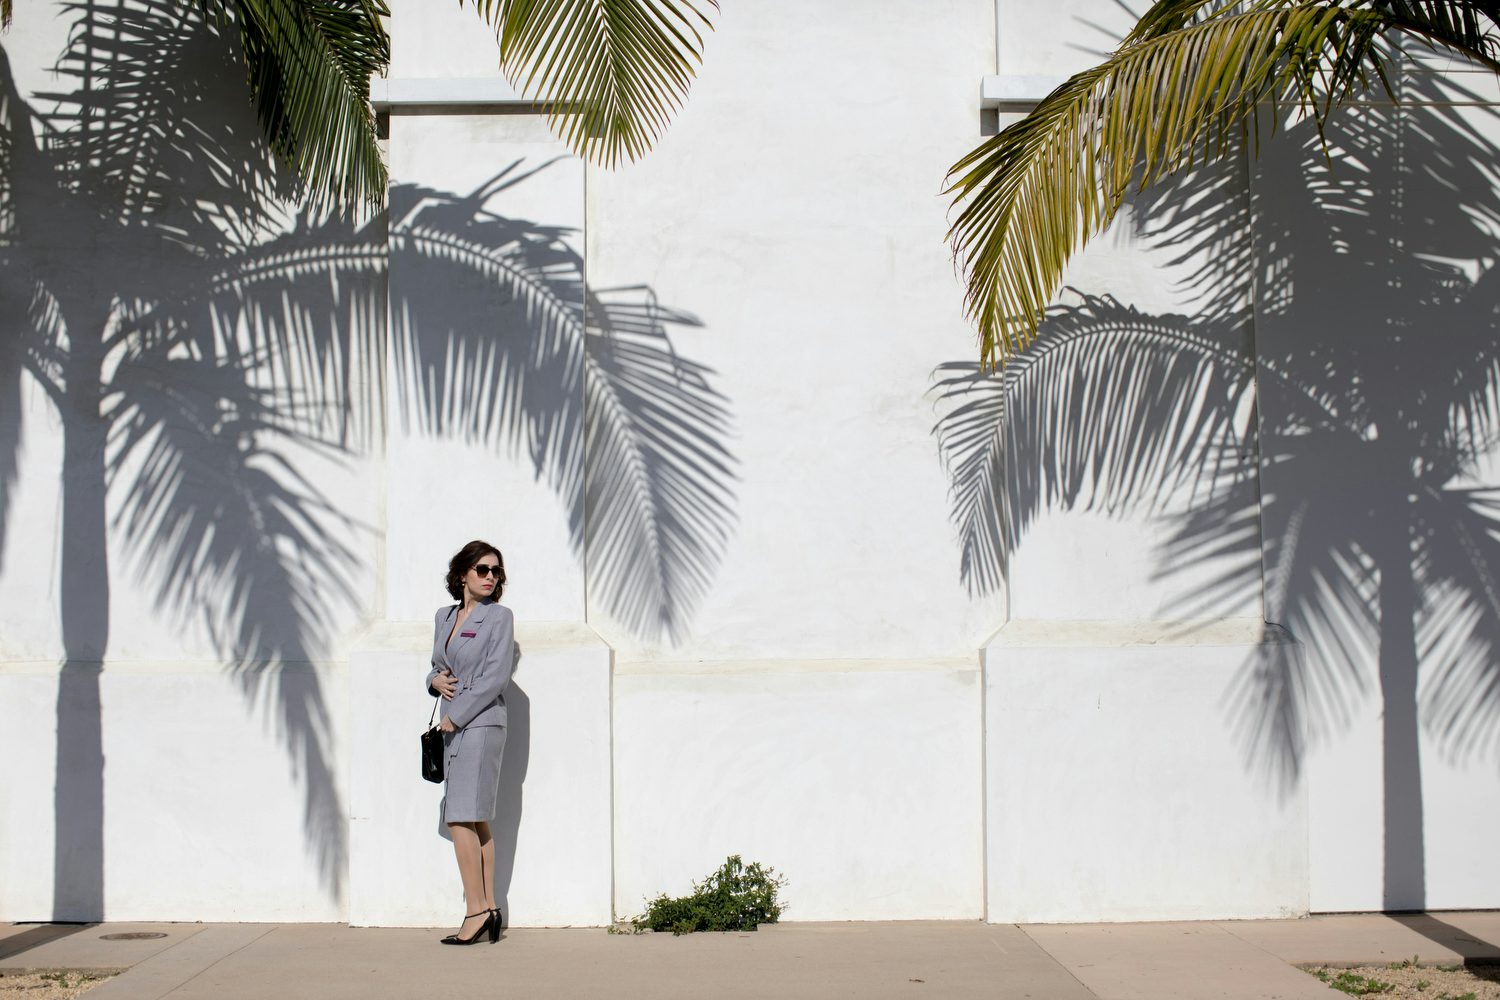 Actor playing Diana Markosian mother stood by a wall under palm trees 